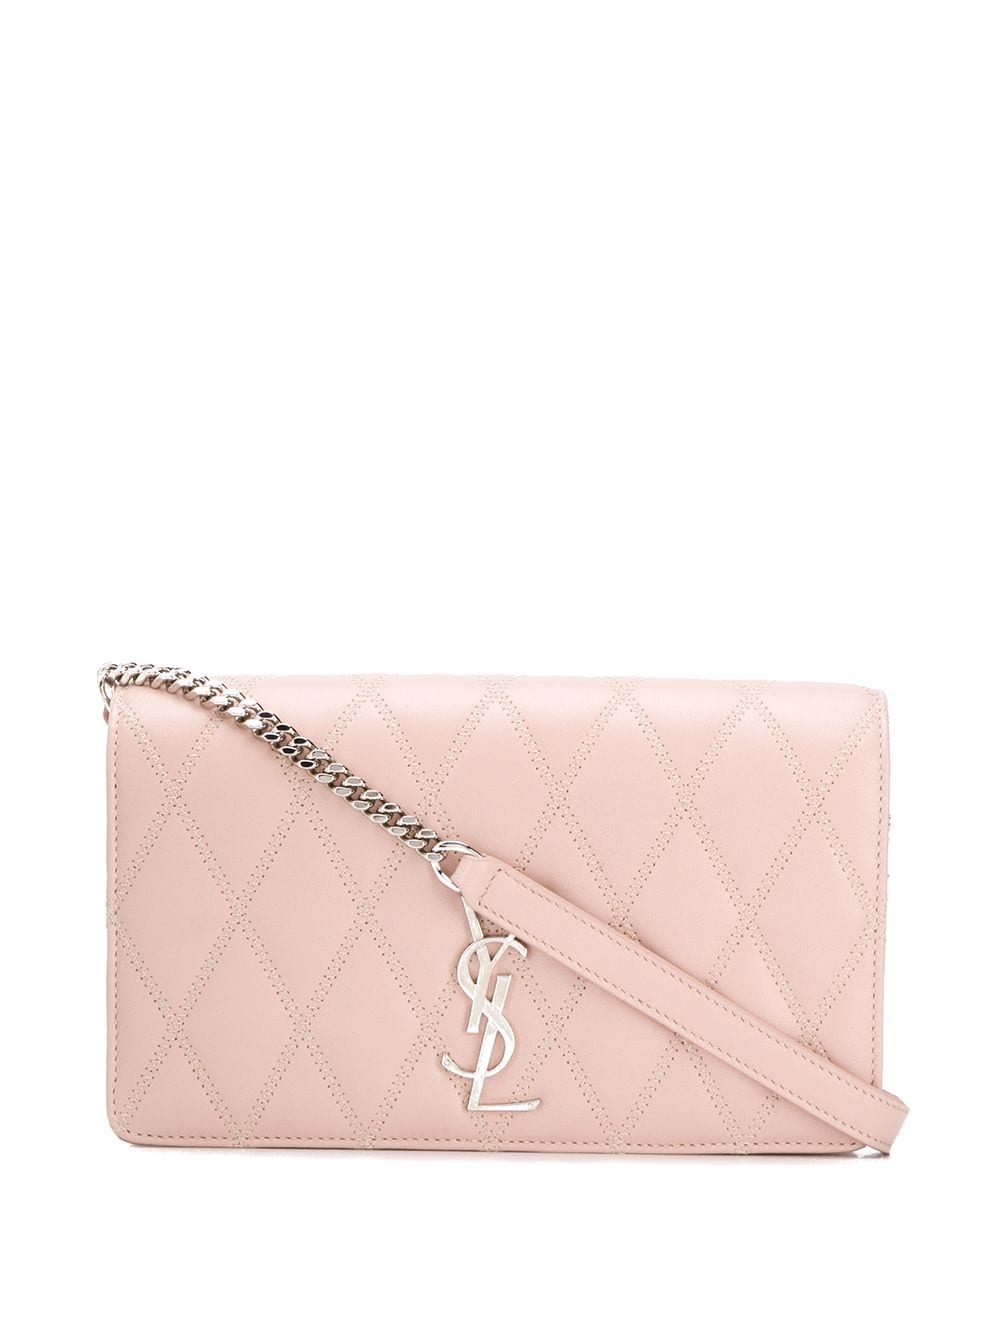 Image 1 of Saint Laurent quilted Angie crossbody bag